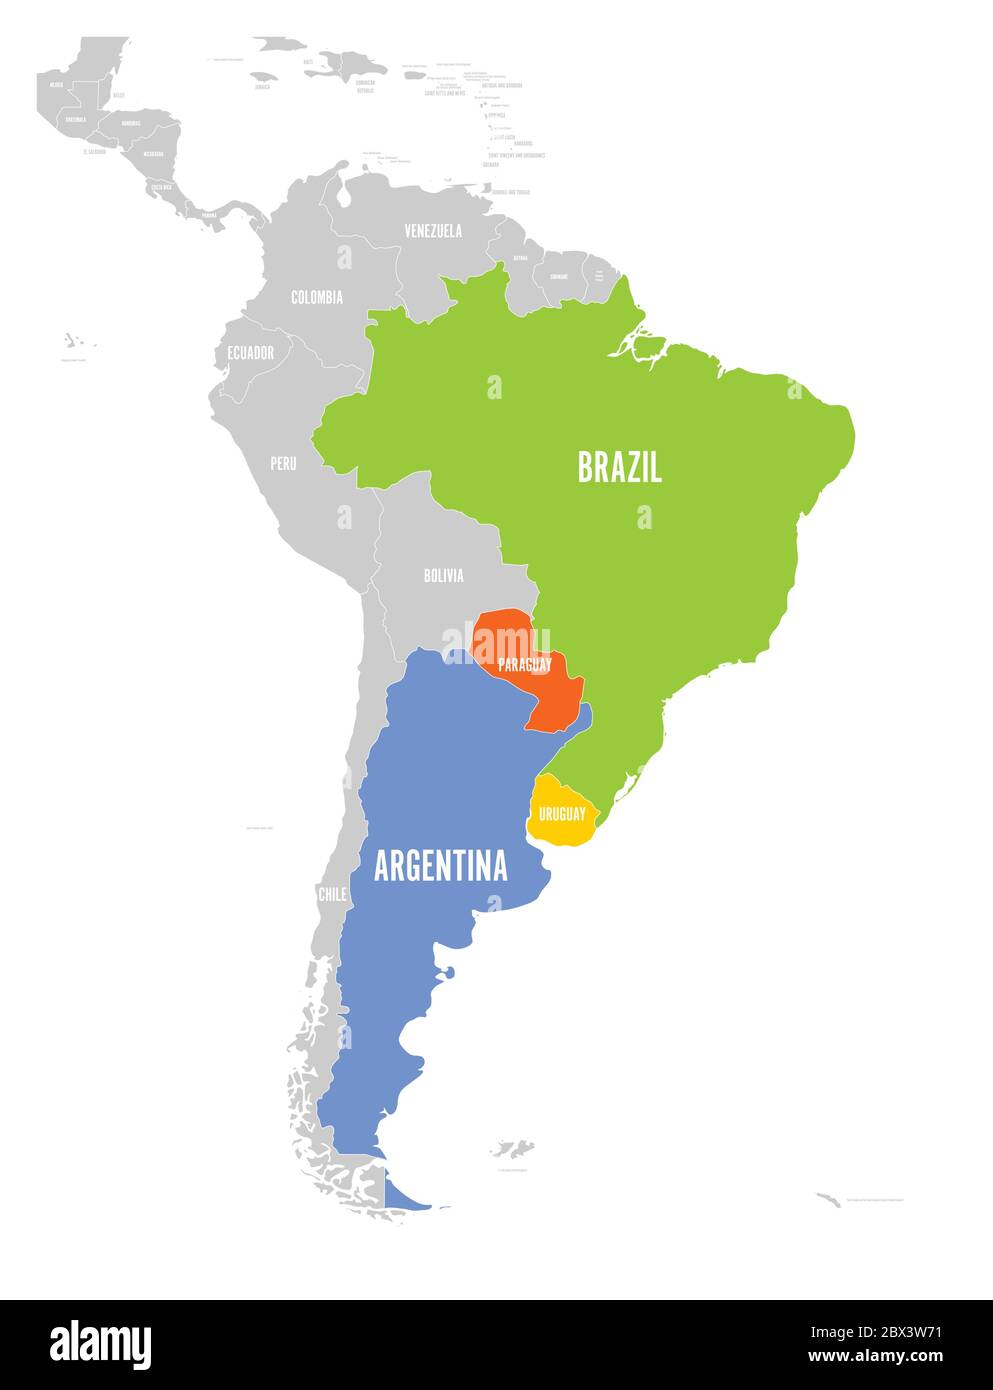 Map of MERCOSUR countires. South american trade association. Highlighted member states Brazil, Paraguay, Uruguay and Argetina. Since December 2016. Stock Vector